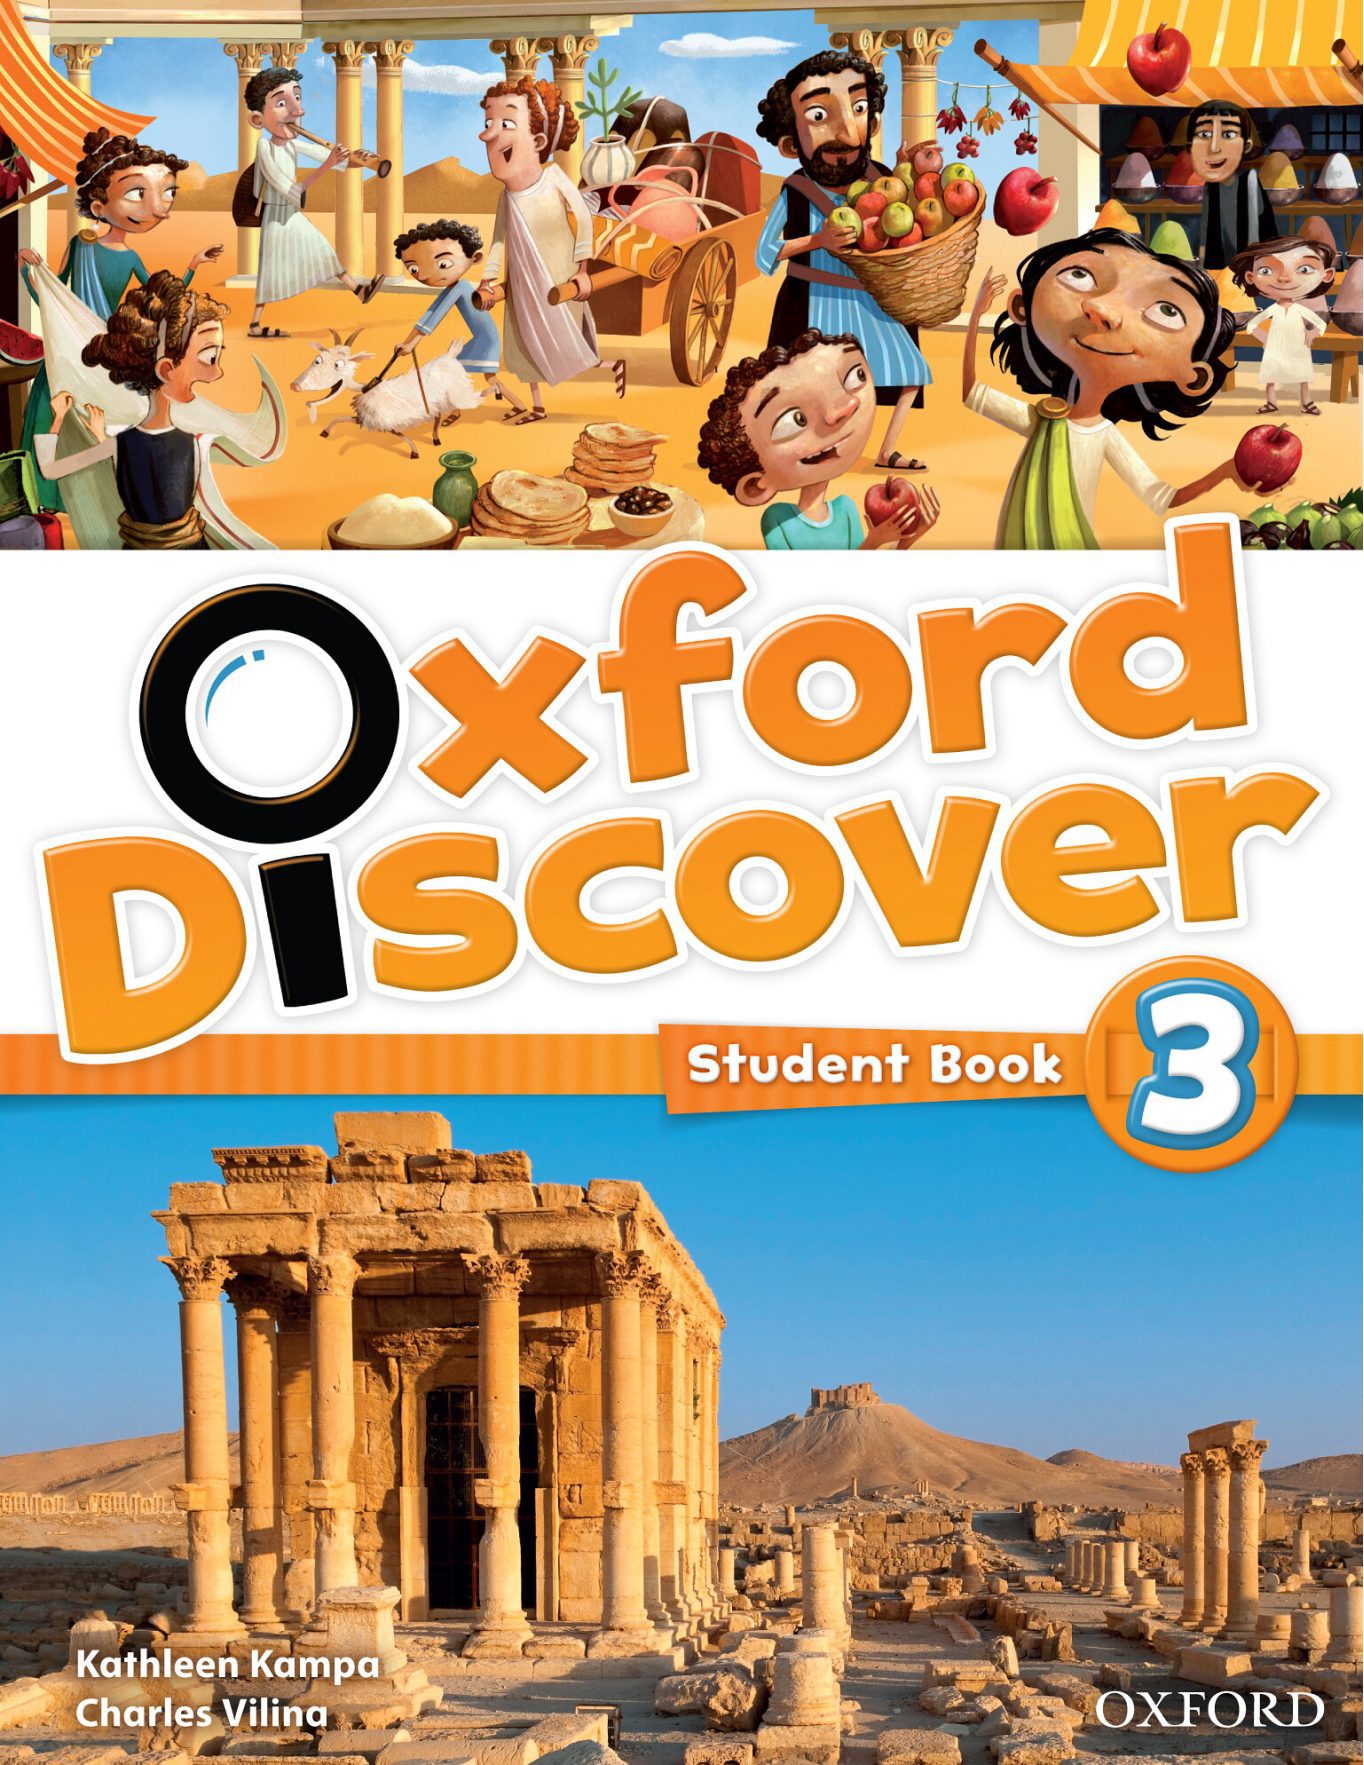 Rich Results on Google's SERP when searching for 'Oxford Discover Student's Book 3'